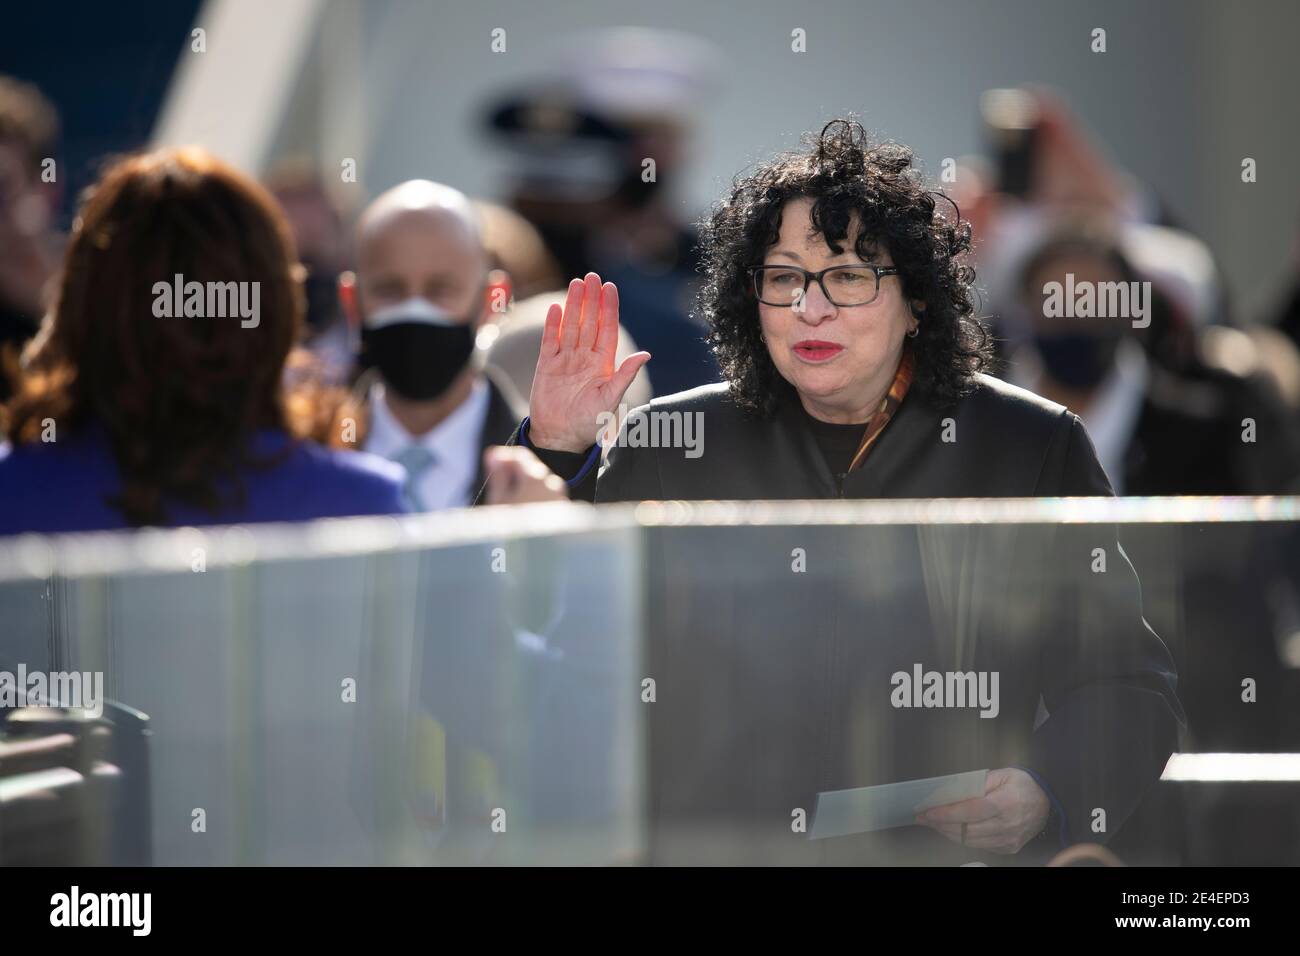 Washington, United States Of America. 20th Jan, 2021. U.S. Supreme Court Justice Sonia Sotomayor administers the oath of office to Vice President Kamala Harris during the 59th Presidential Inauguration ceremony at the West Front of the U.S. Capitol January 20, 2021 in Washington, DC Credit: Planetpix/Alamy Live News Stock Photo